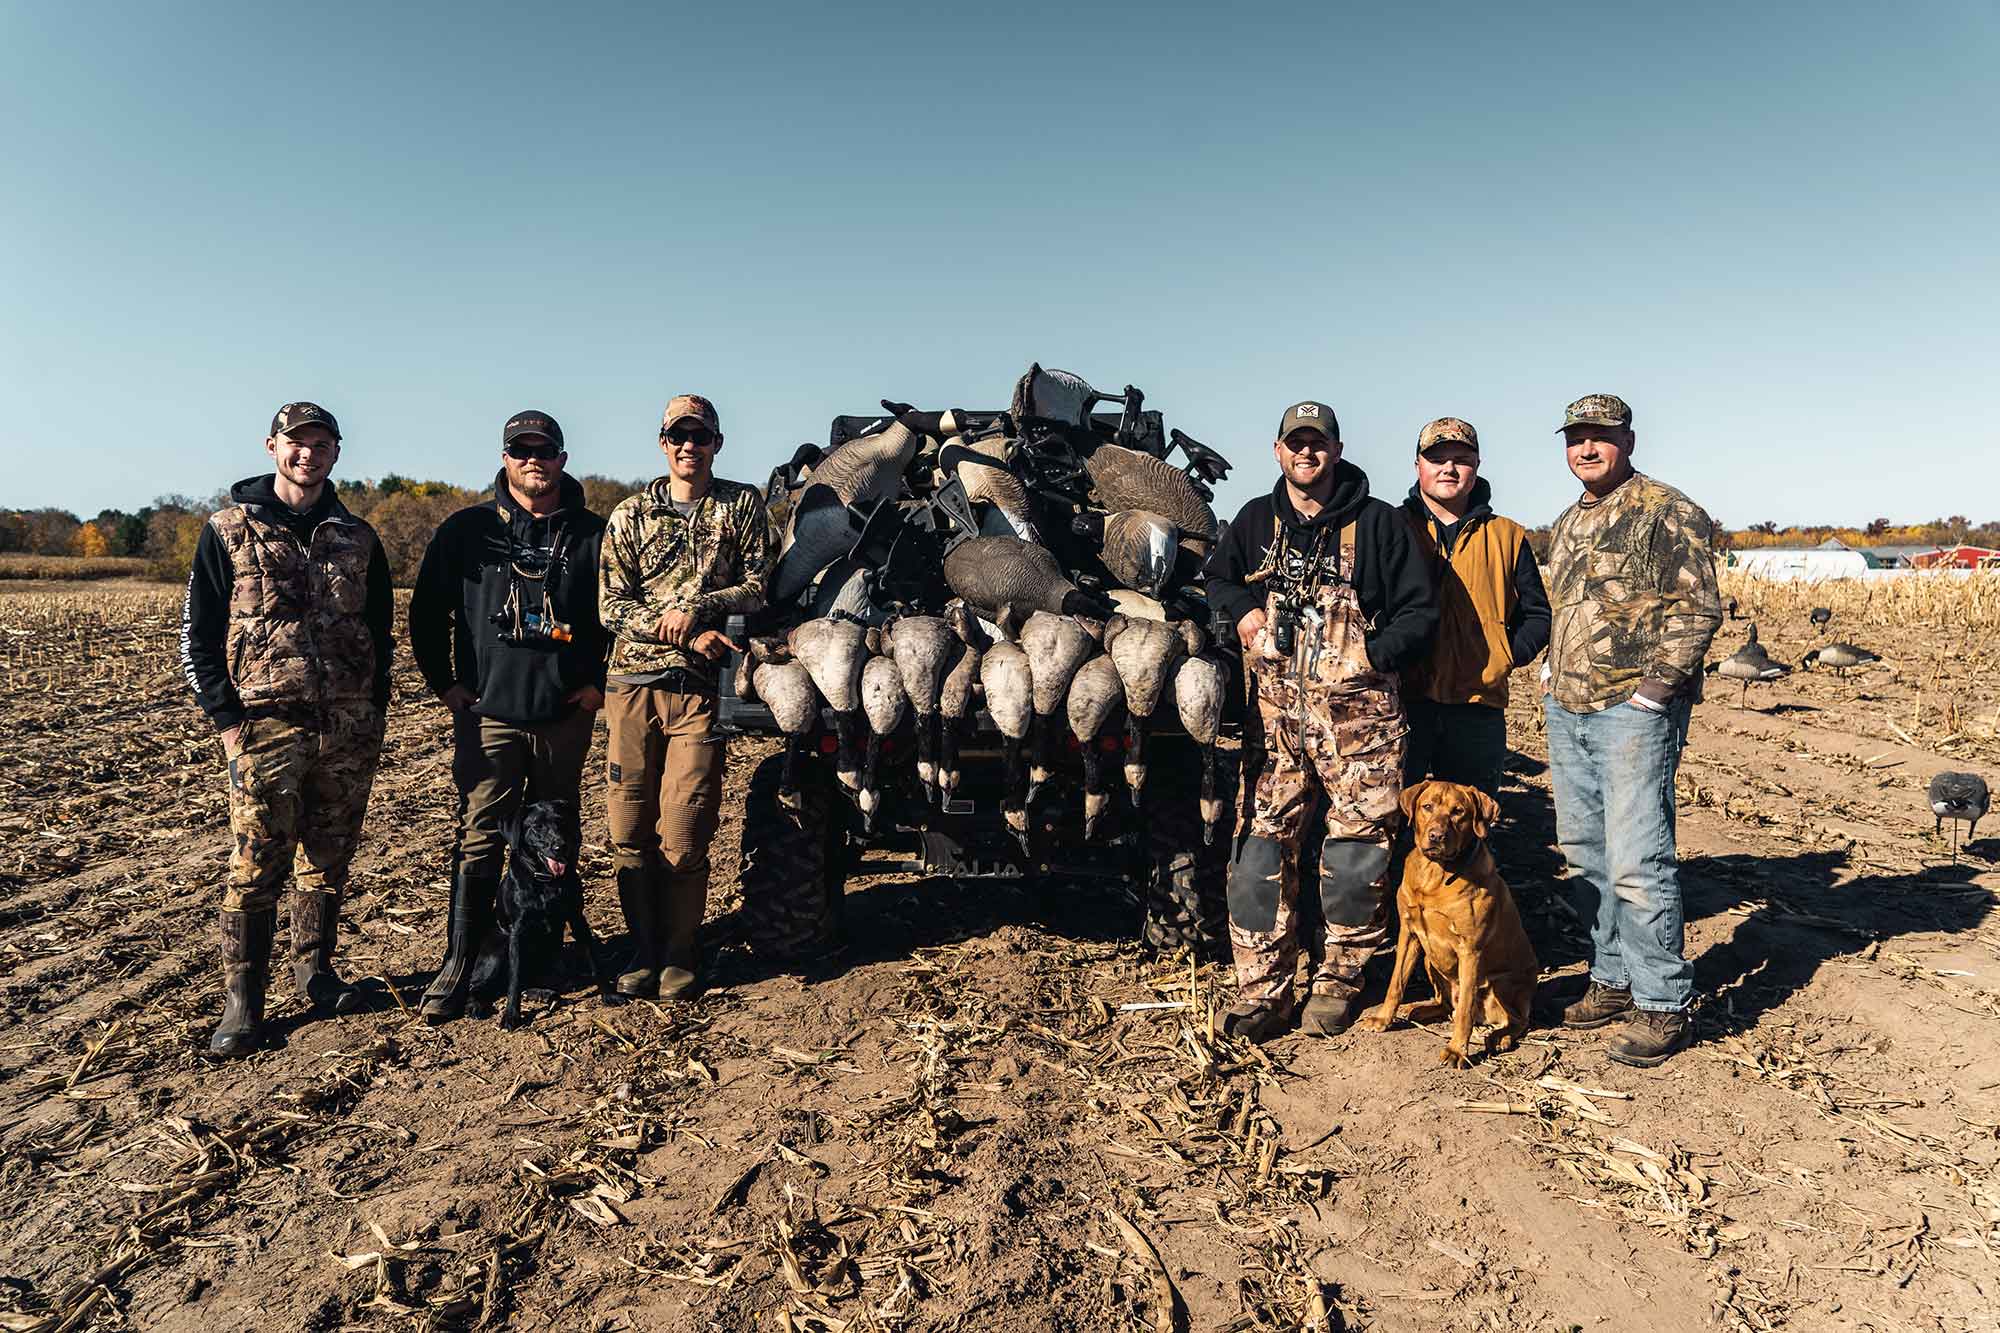 Cole Fabro (second from right) and his crew of buddies after a successful hunt.